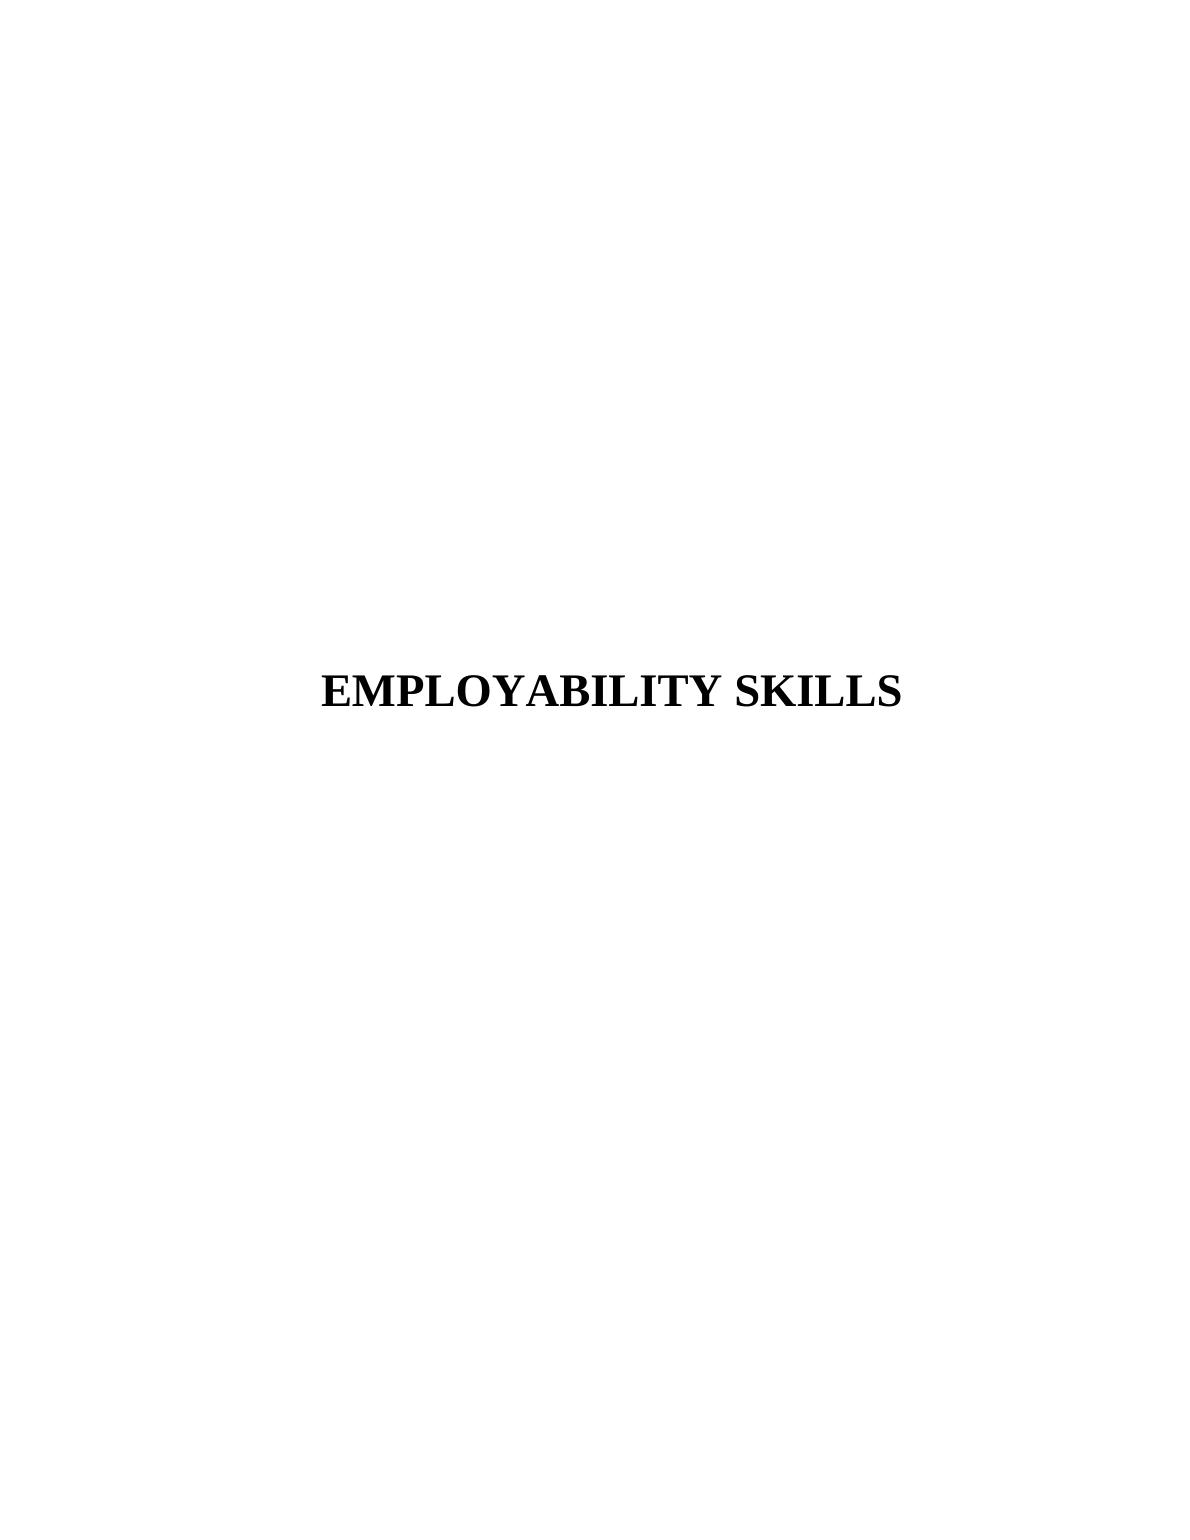 Employability Skills in HSC Sector_1